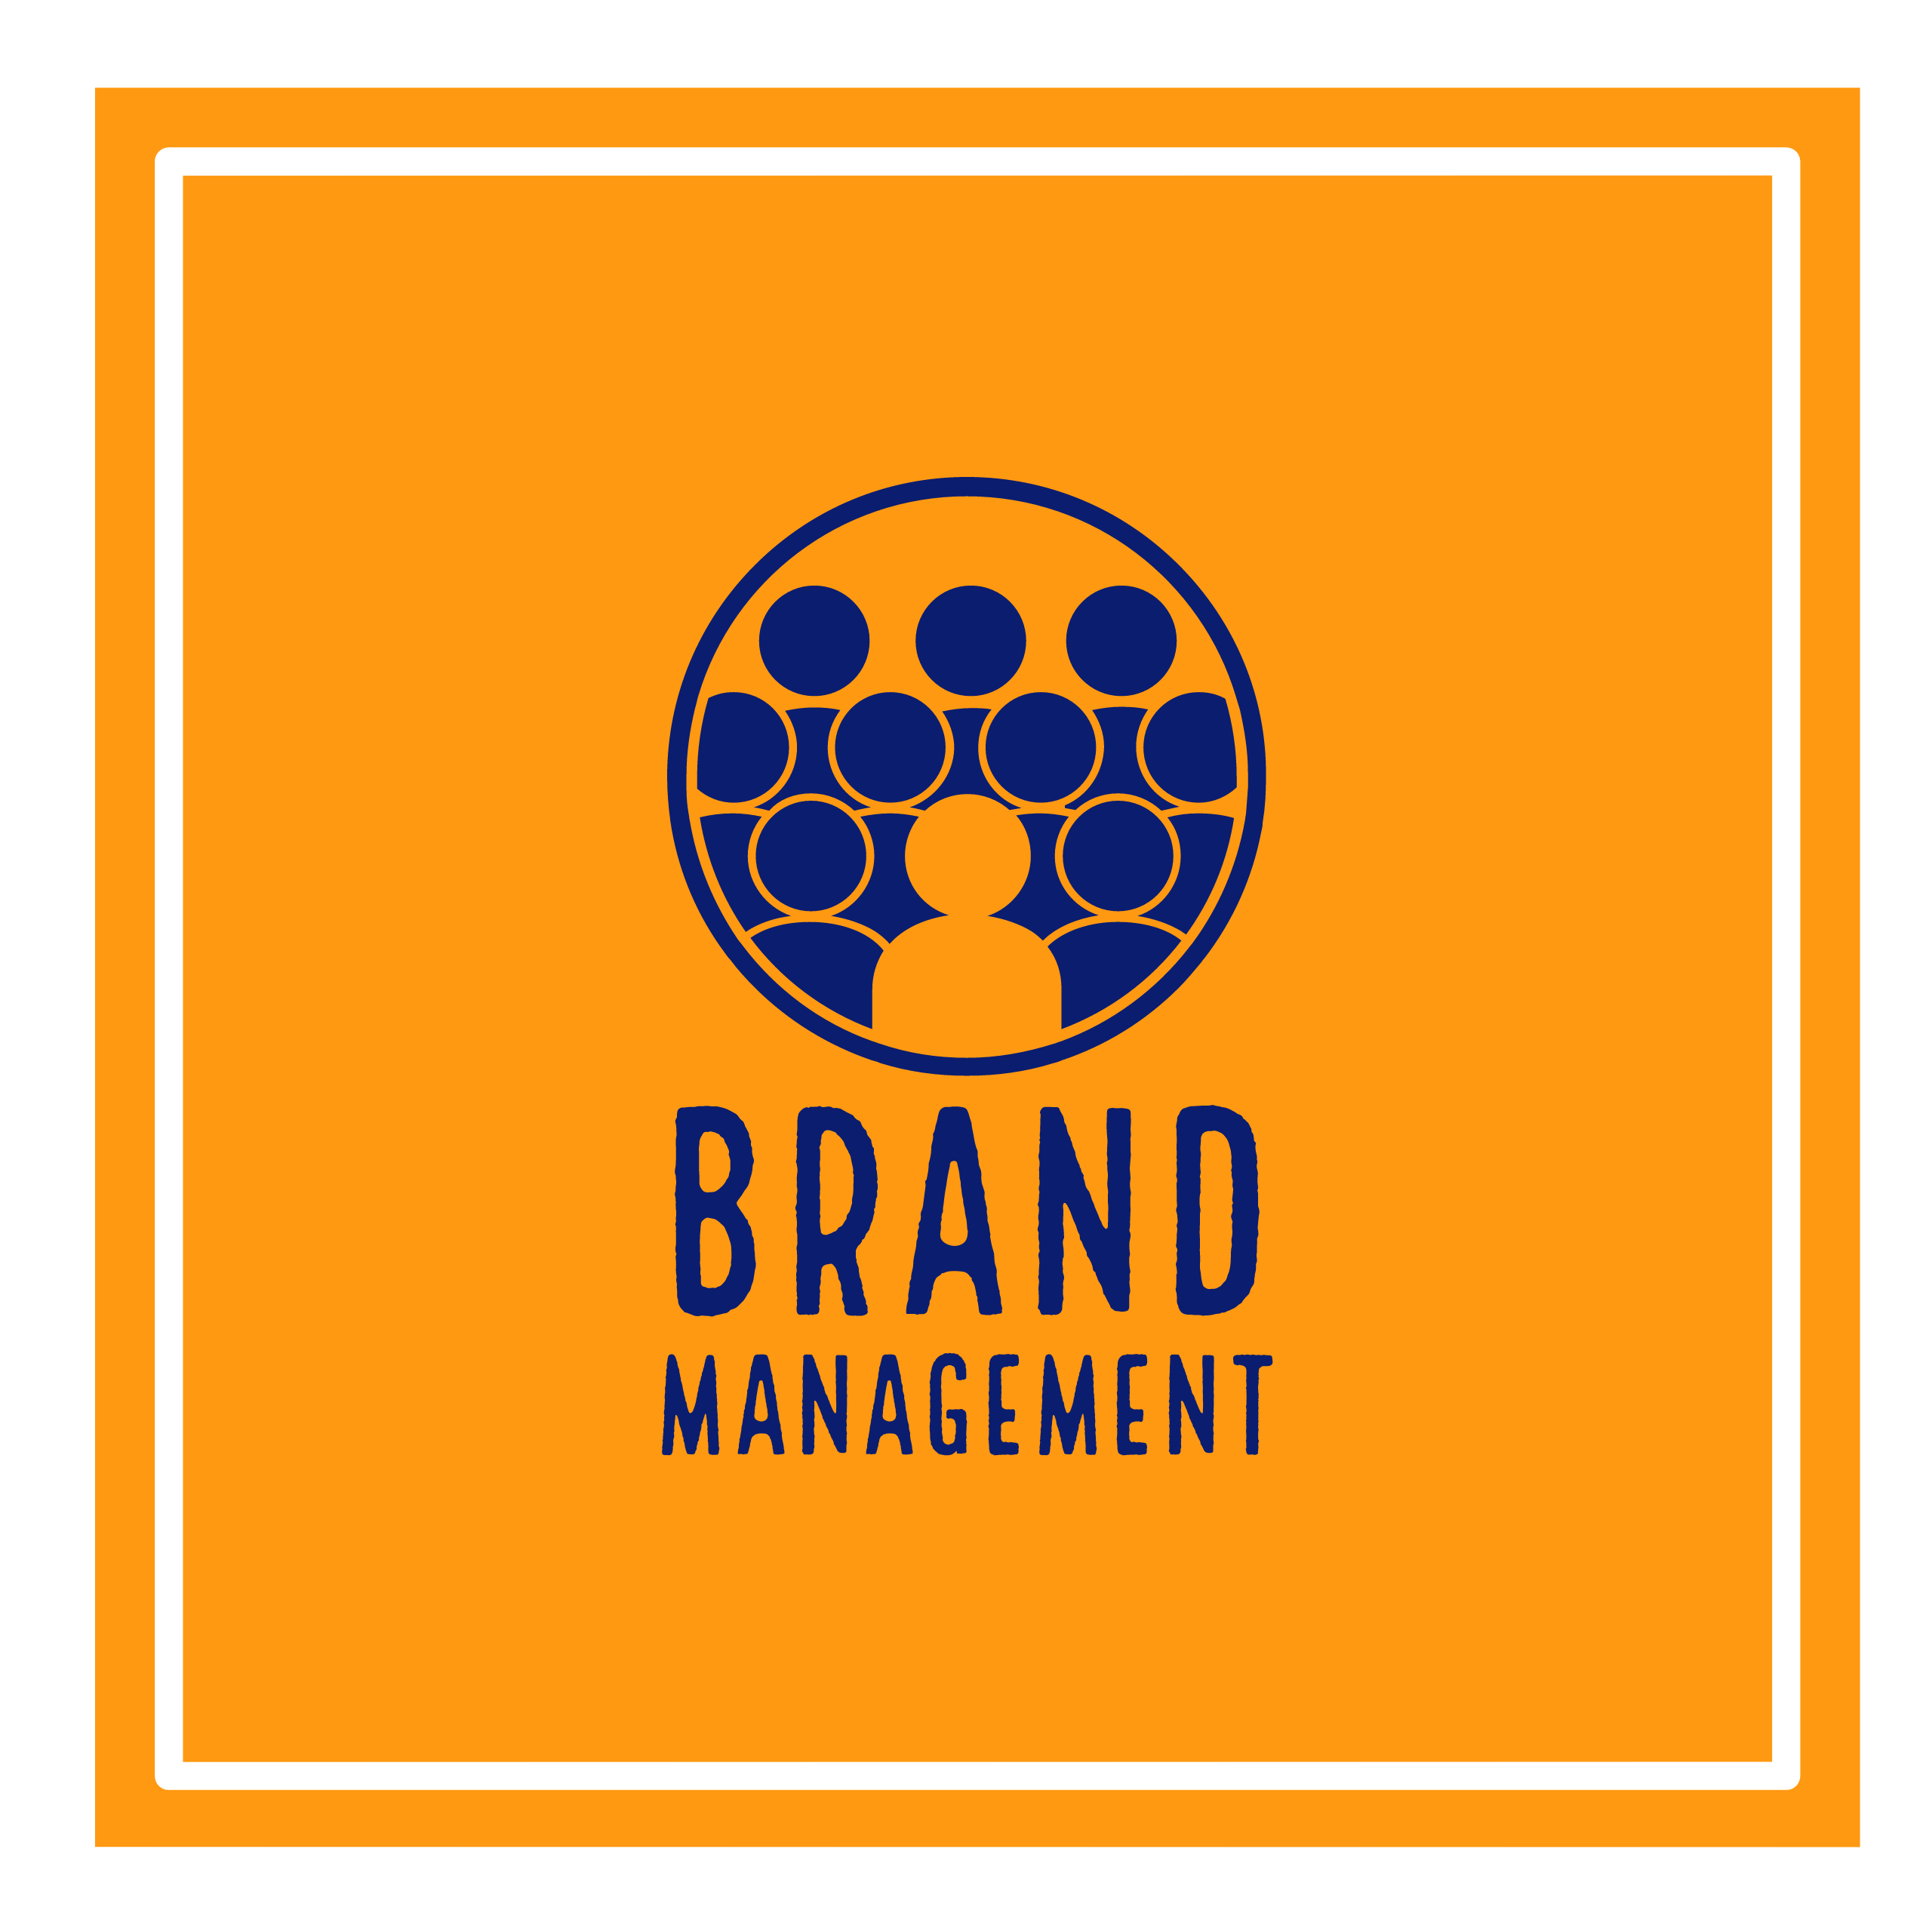 Brand Management: Why A Brand Identity Matters